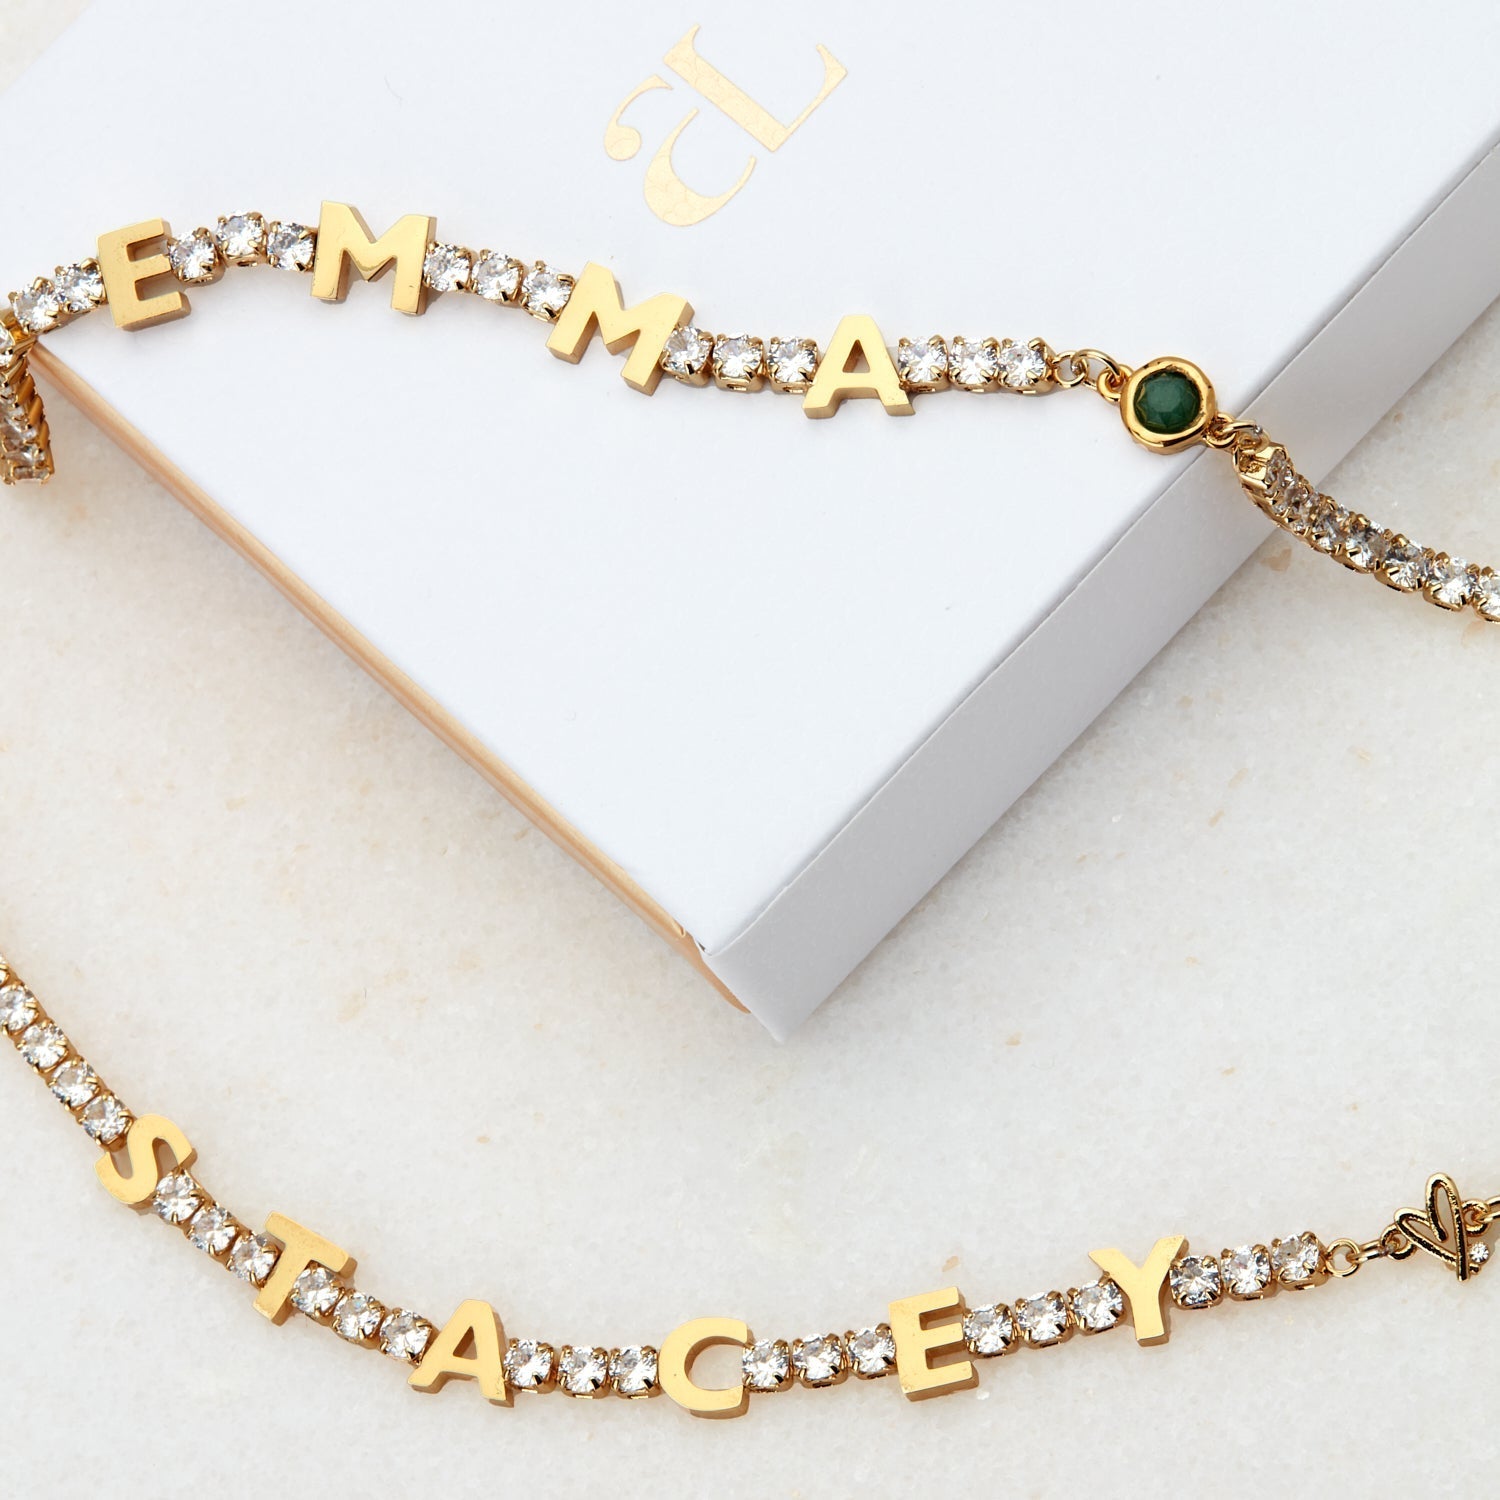 Name Bracelet in Gold Plated